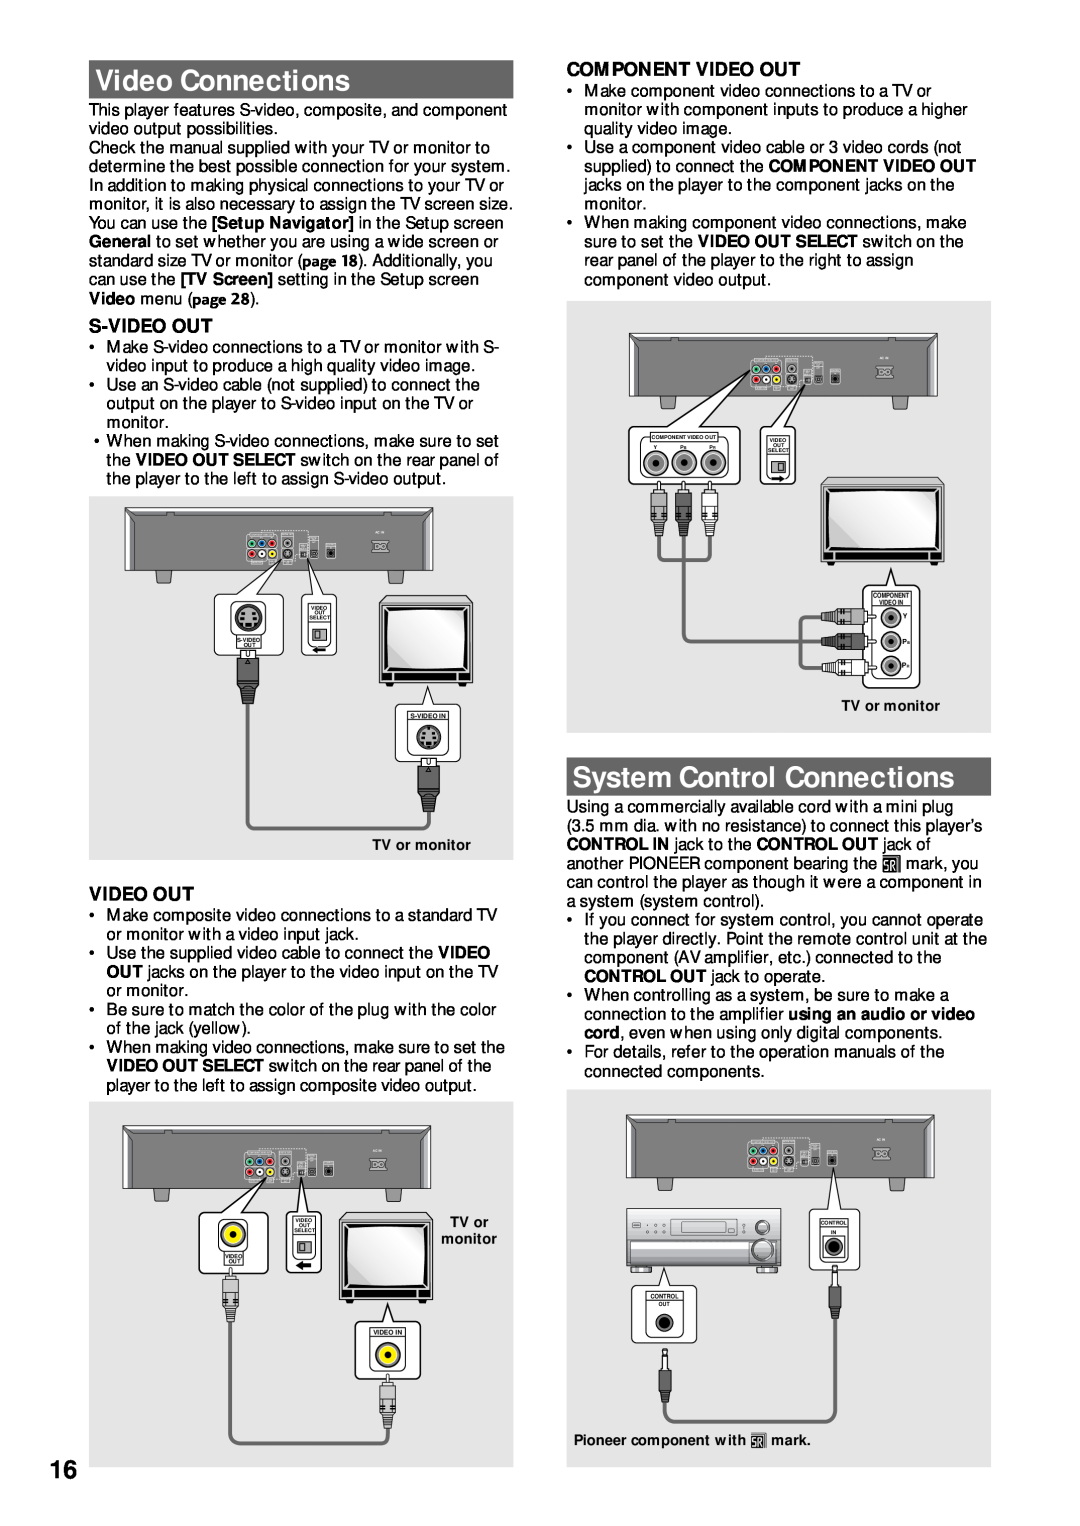 Pioneer DV-333 operating instructions Video Connections, System Control Connections, S-Video Out, Component Video Out 